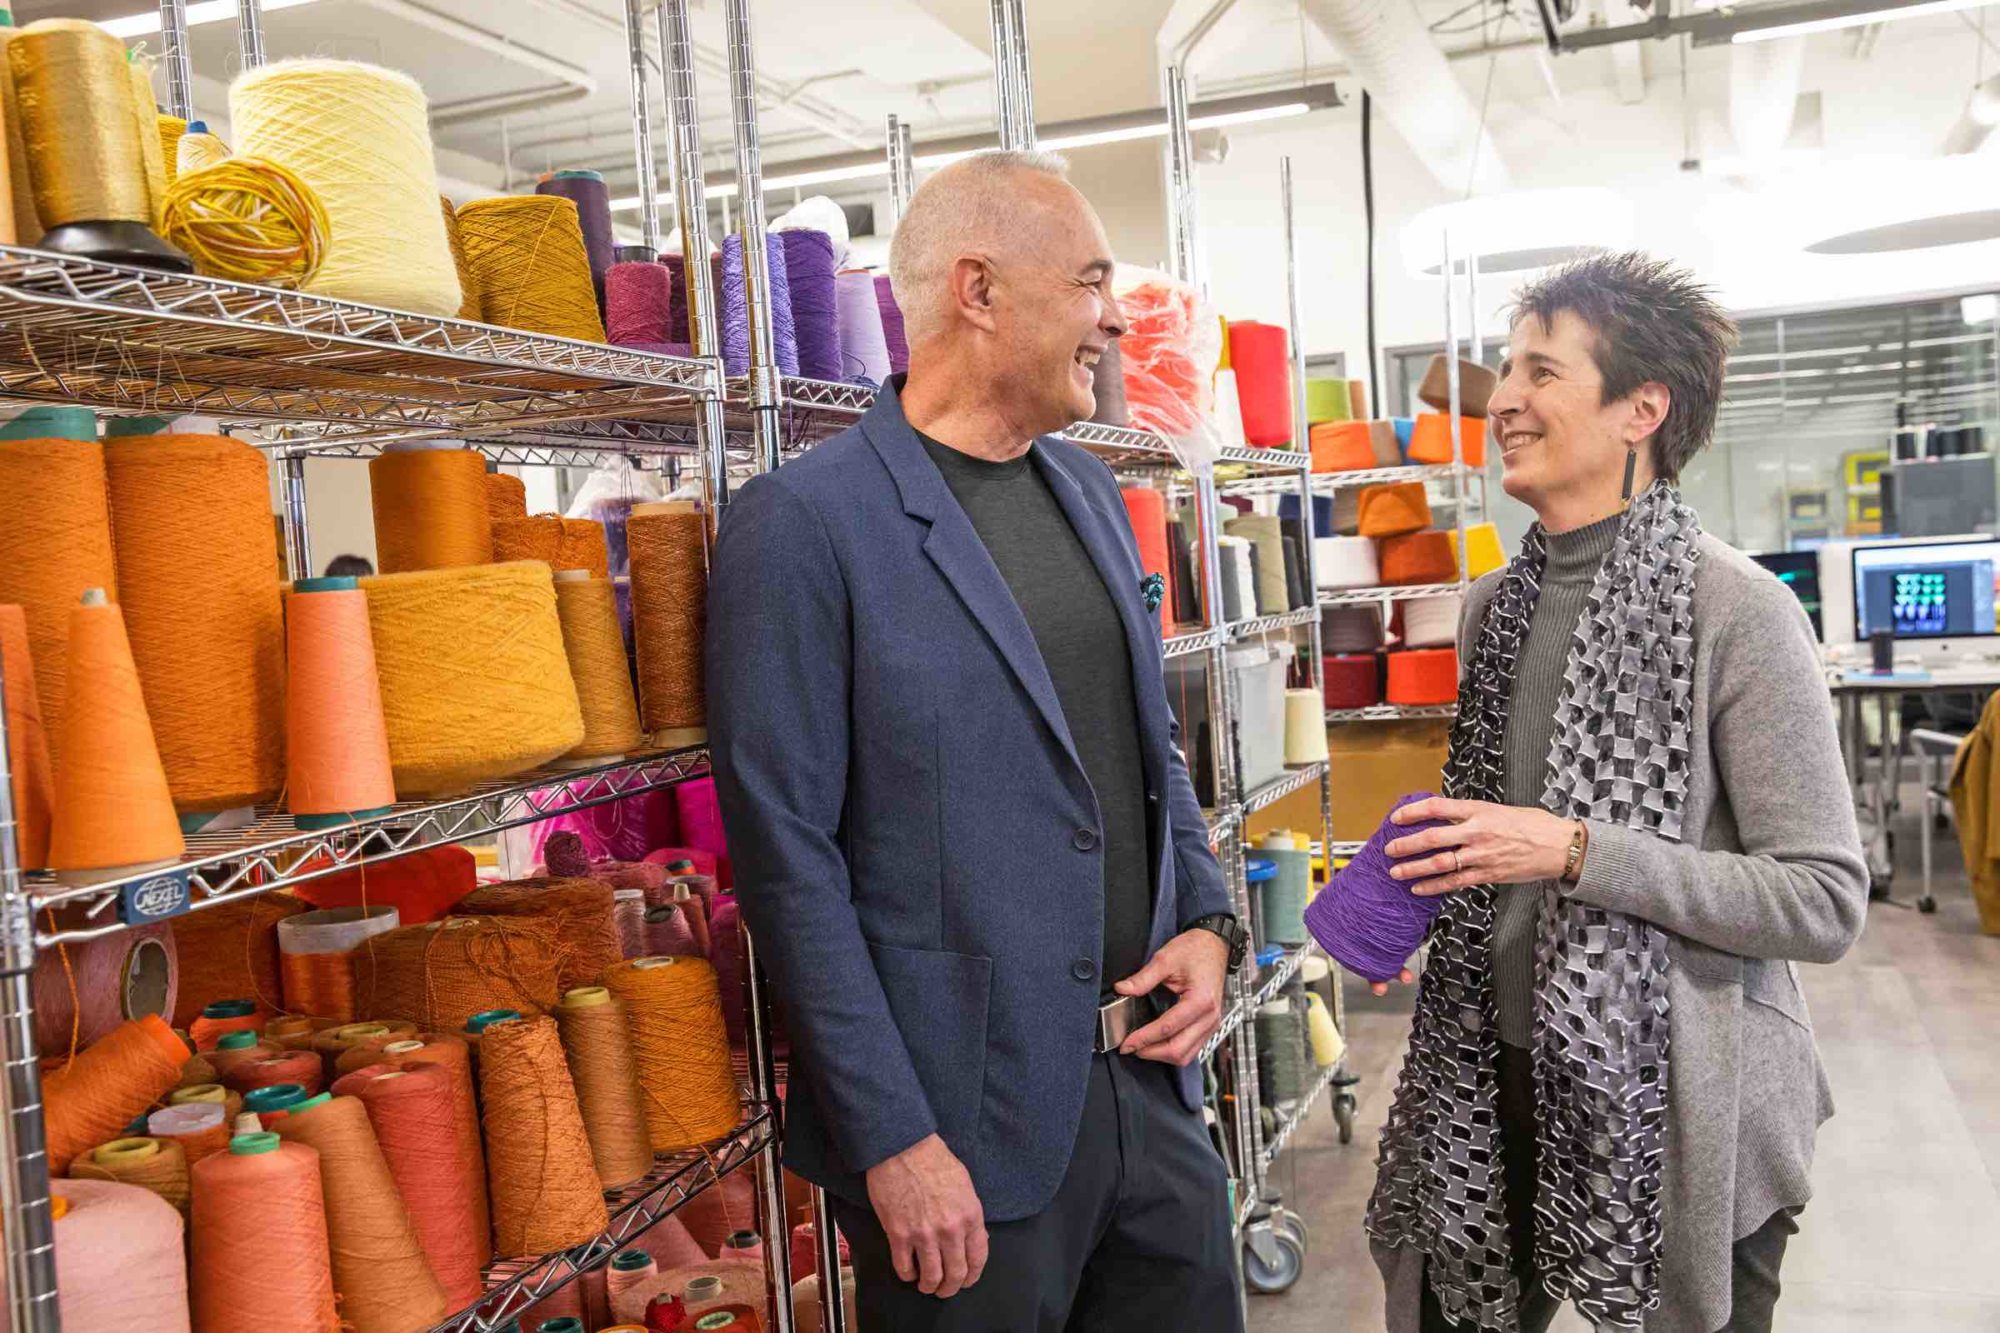 Two faculty members stand by spools of yarn